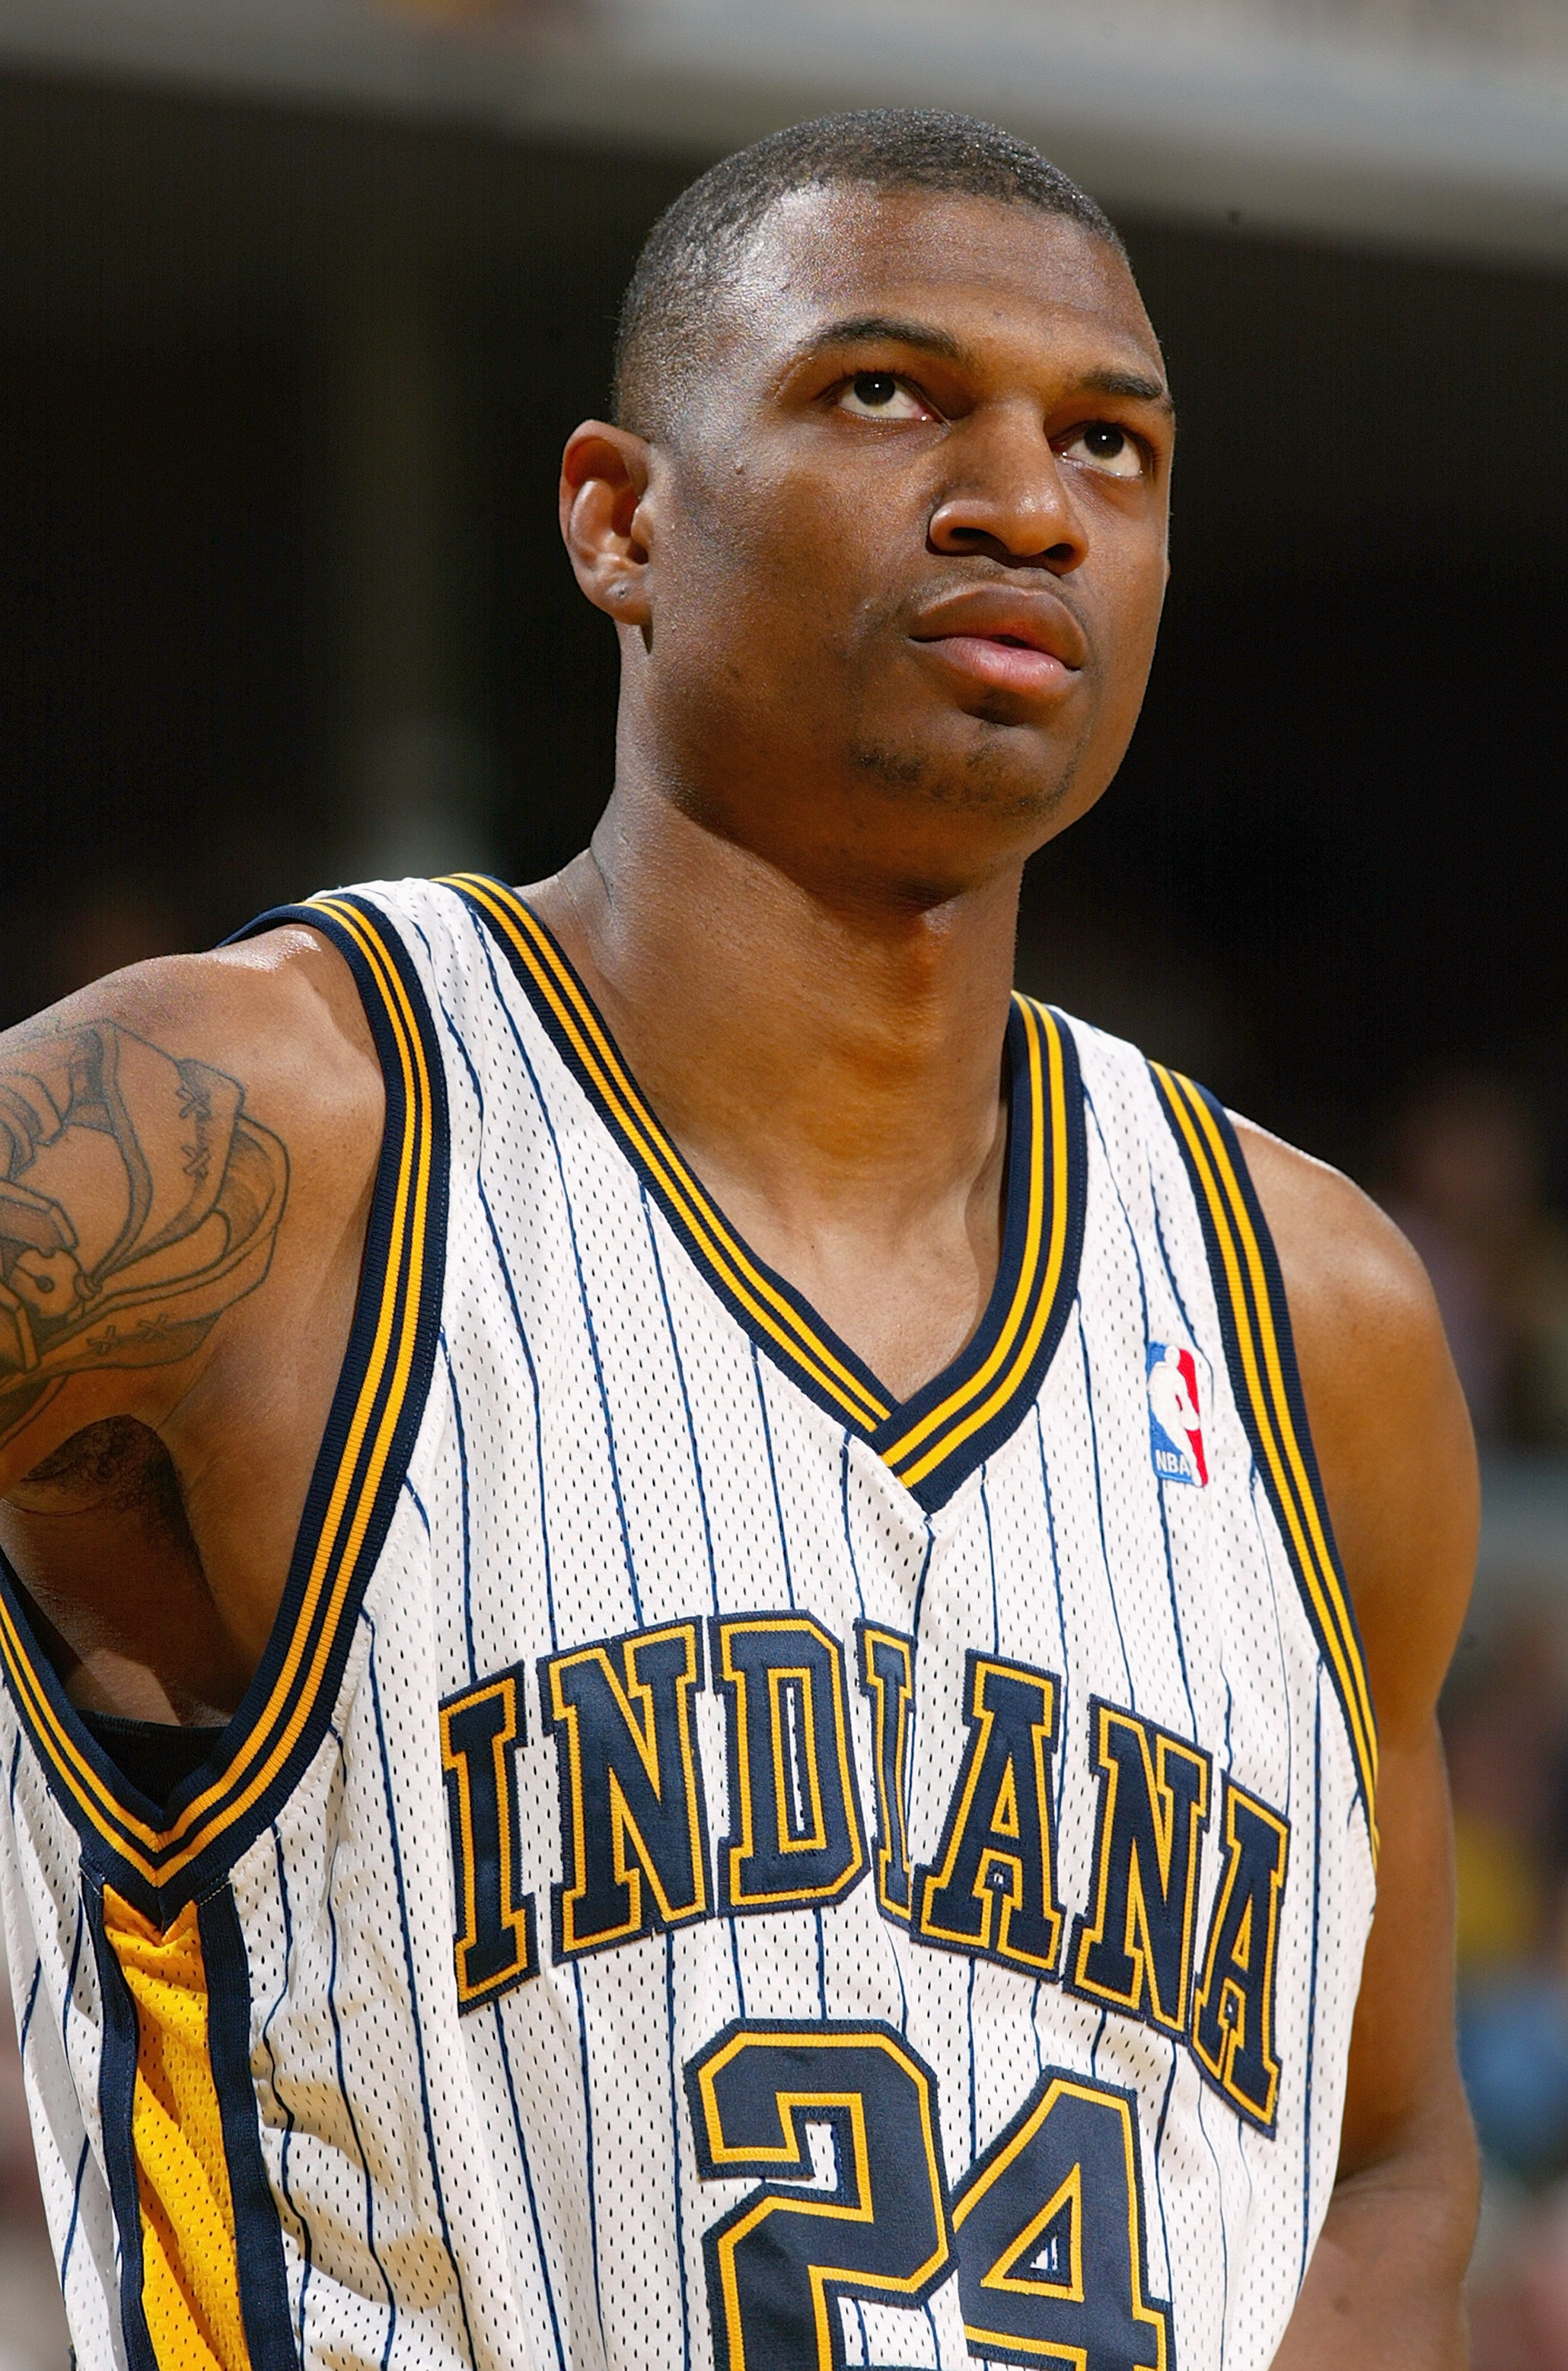 INDIANAPOLIS - MARCH 9:   Jonathan Bender #24 of the Indiana Pacers looks on against the Toronto Raptors during the game at Conseco Fieldhouse on March 9, 2004 in Indianapolis, Indiana.  The Pacers won 94-84.   NOTE TO USER: User expressly acknowledges an